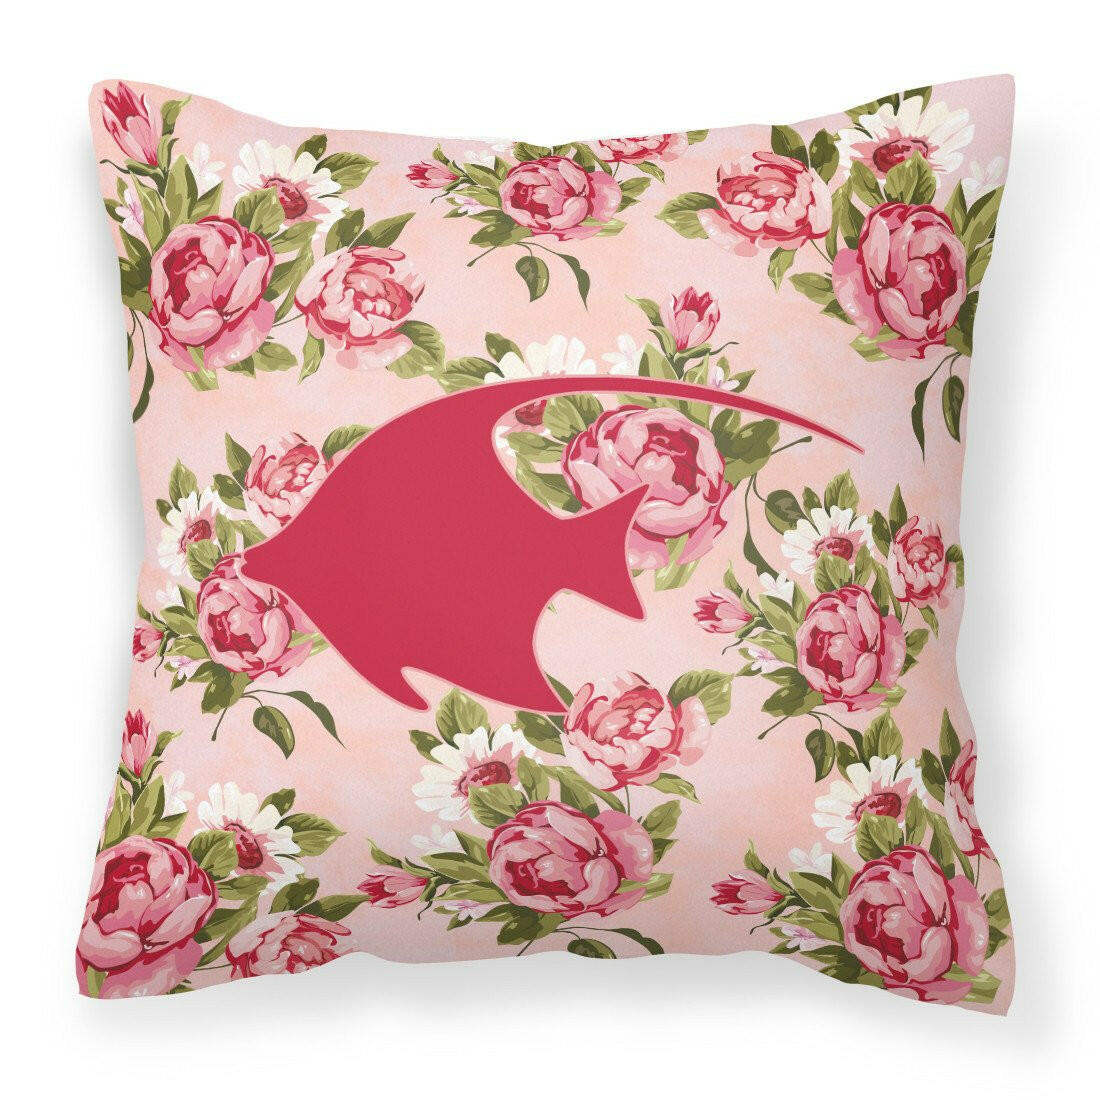 Fish - Angel Fish Shabby Chic Pink Roses  Fabric Decorative Pillow BB1019-RS-PK-PW1414 - the-store.com